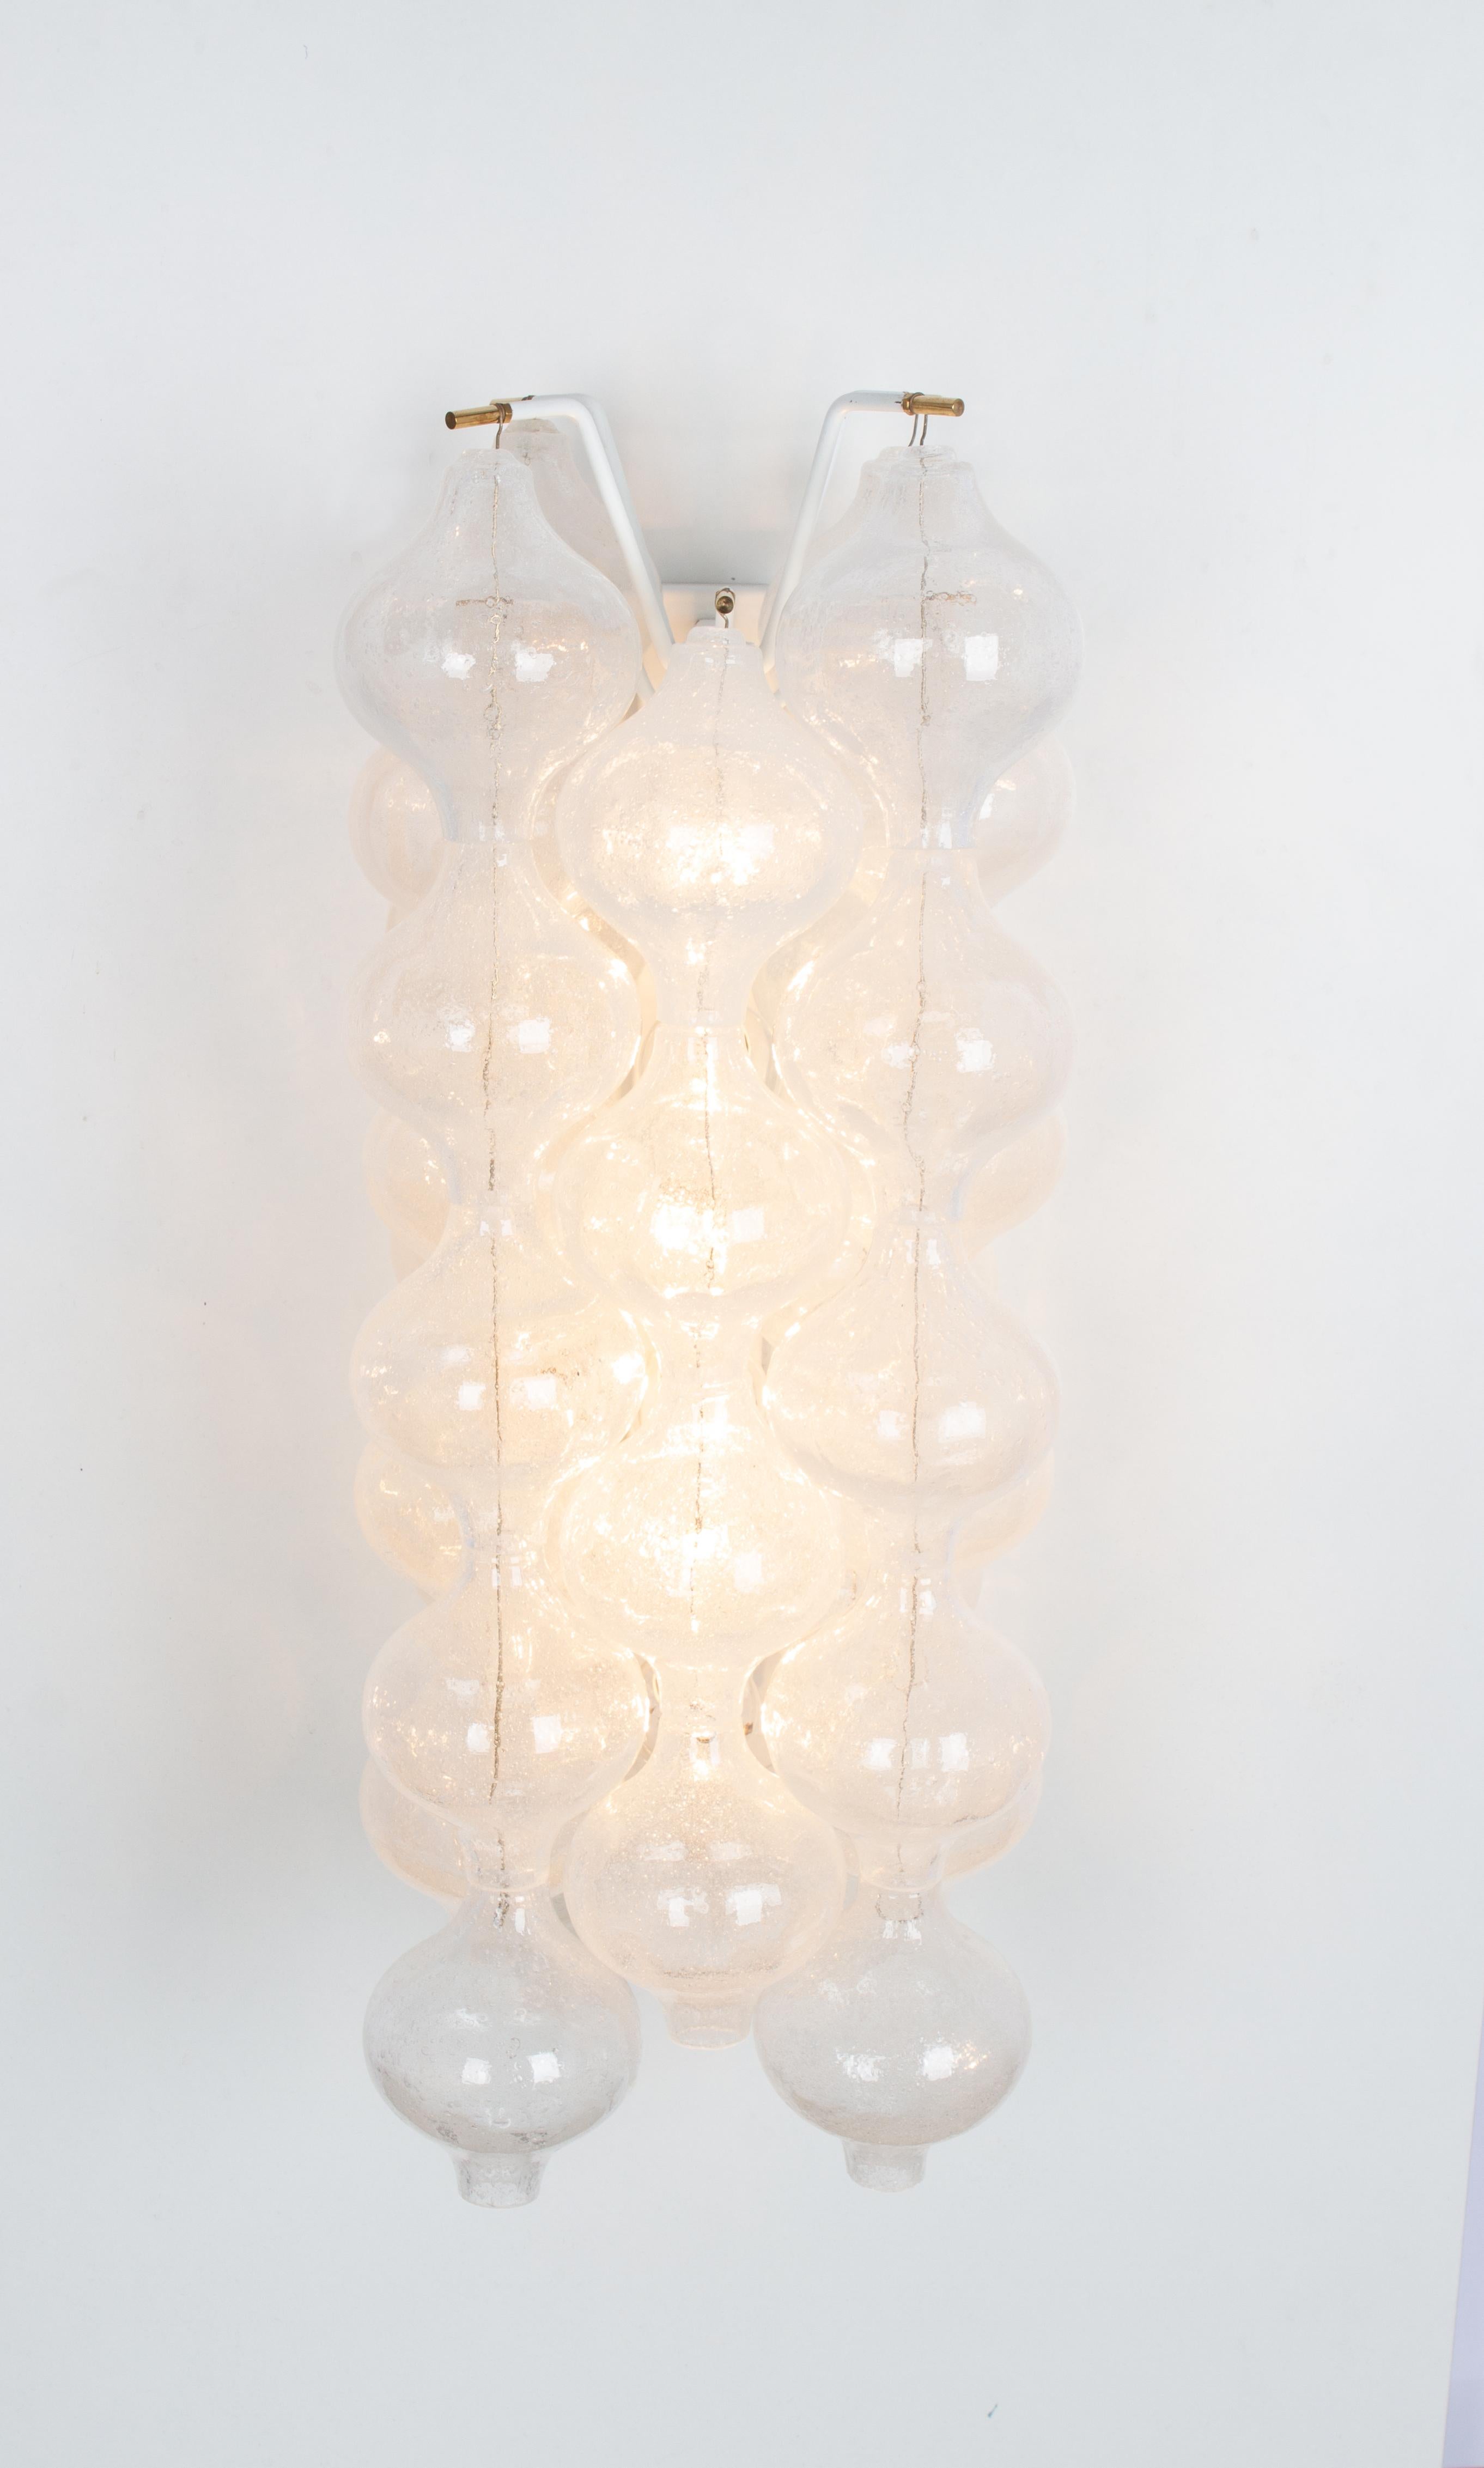 1 of 5 Extra Large Kalmar 'Tulipan' Sconce Wall Light, Austria, 1970s For Sale 11